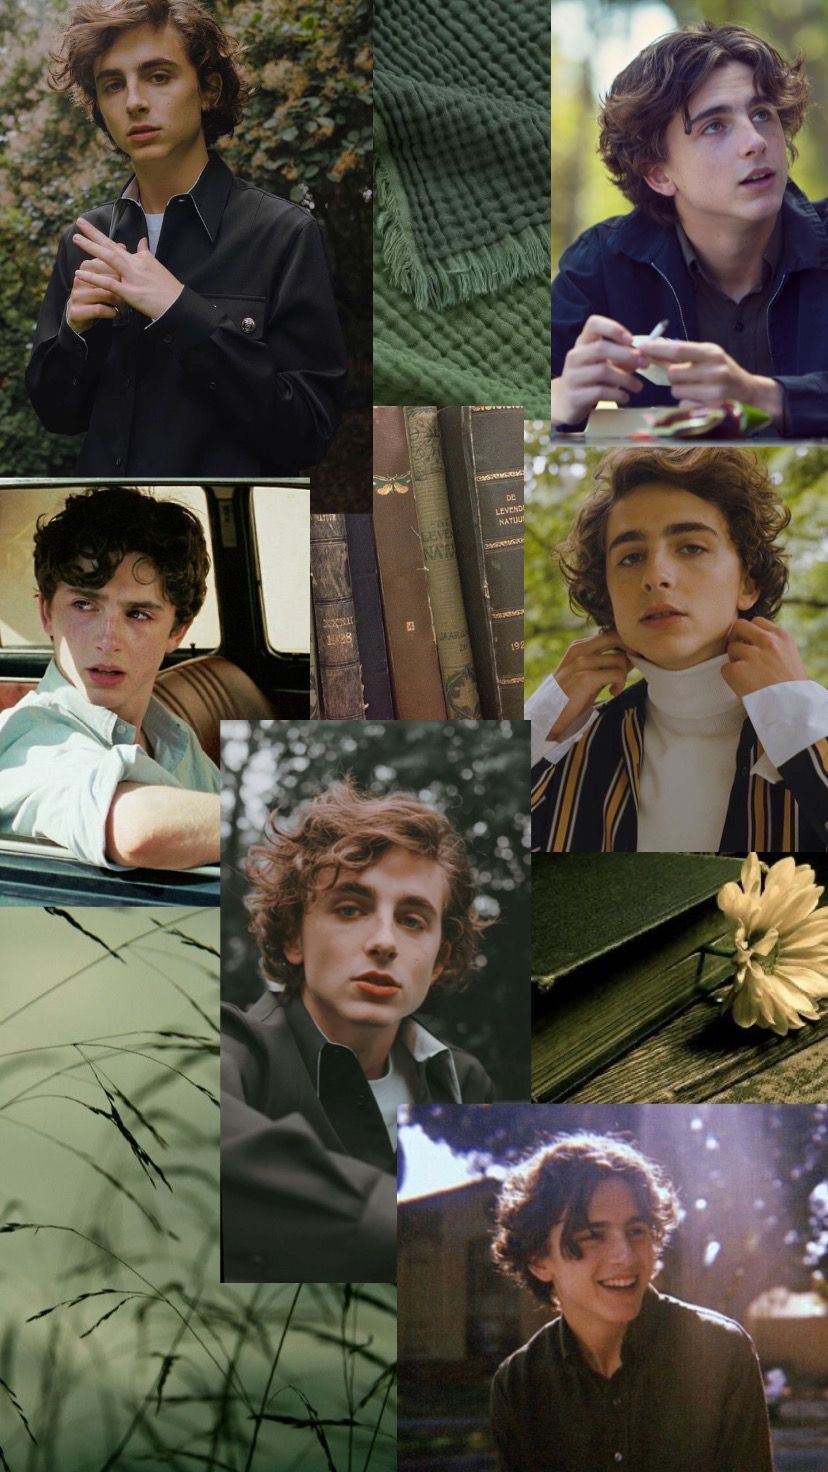 Collage of Timothee Chalamet in different roles and outfits - Timothee Chalamet